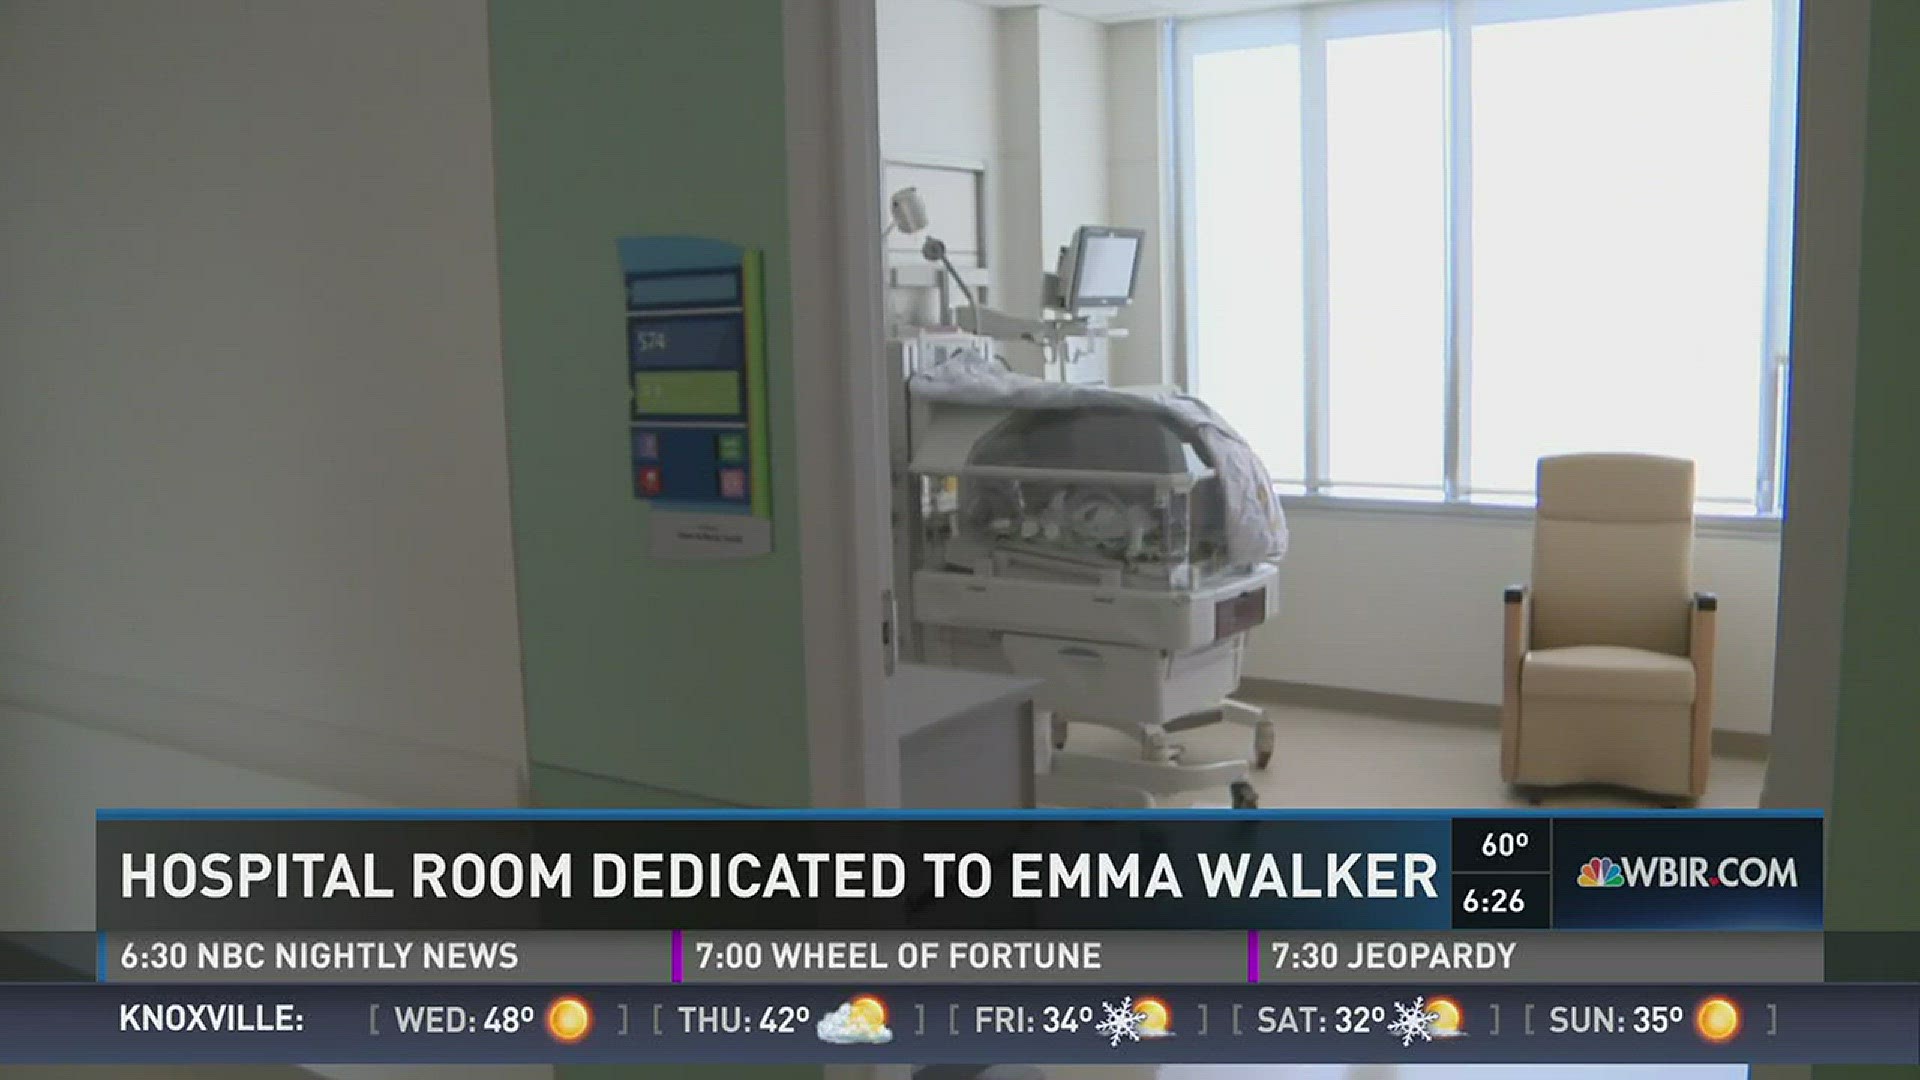 Jan. 3, 2017: A NICU room at East Tennessee Children's Hospital will be named in honor of Knoxville teen Emma Walker, who was killed in Nov. 2016.